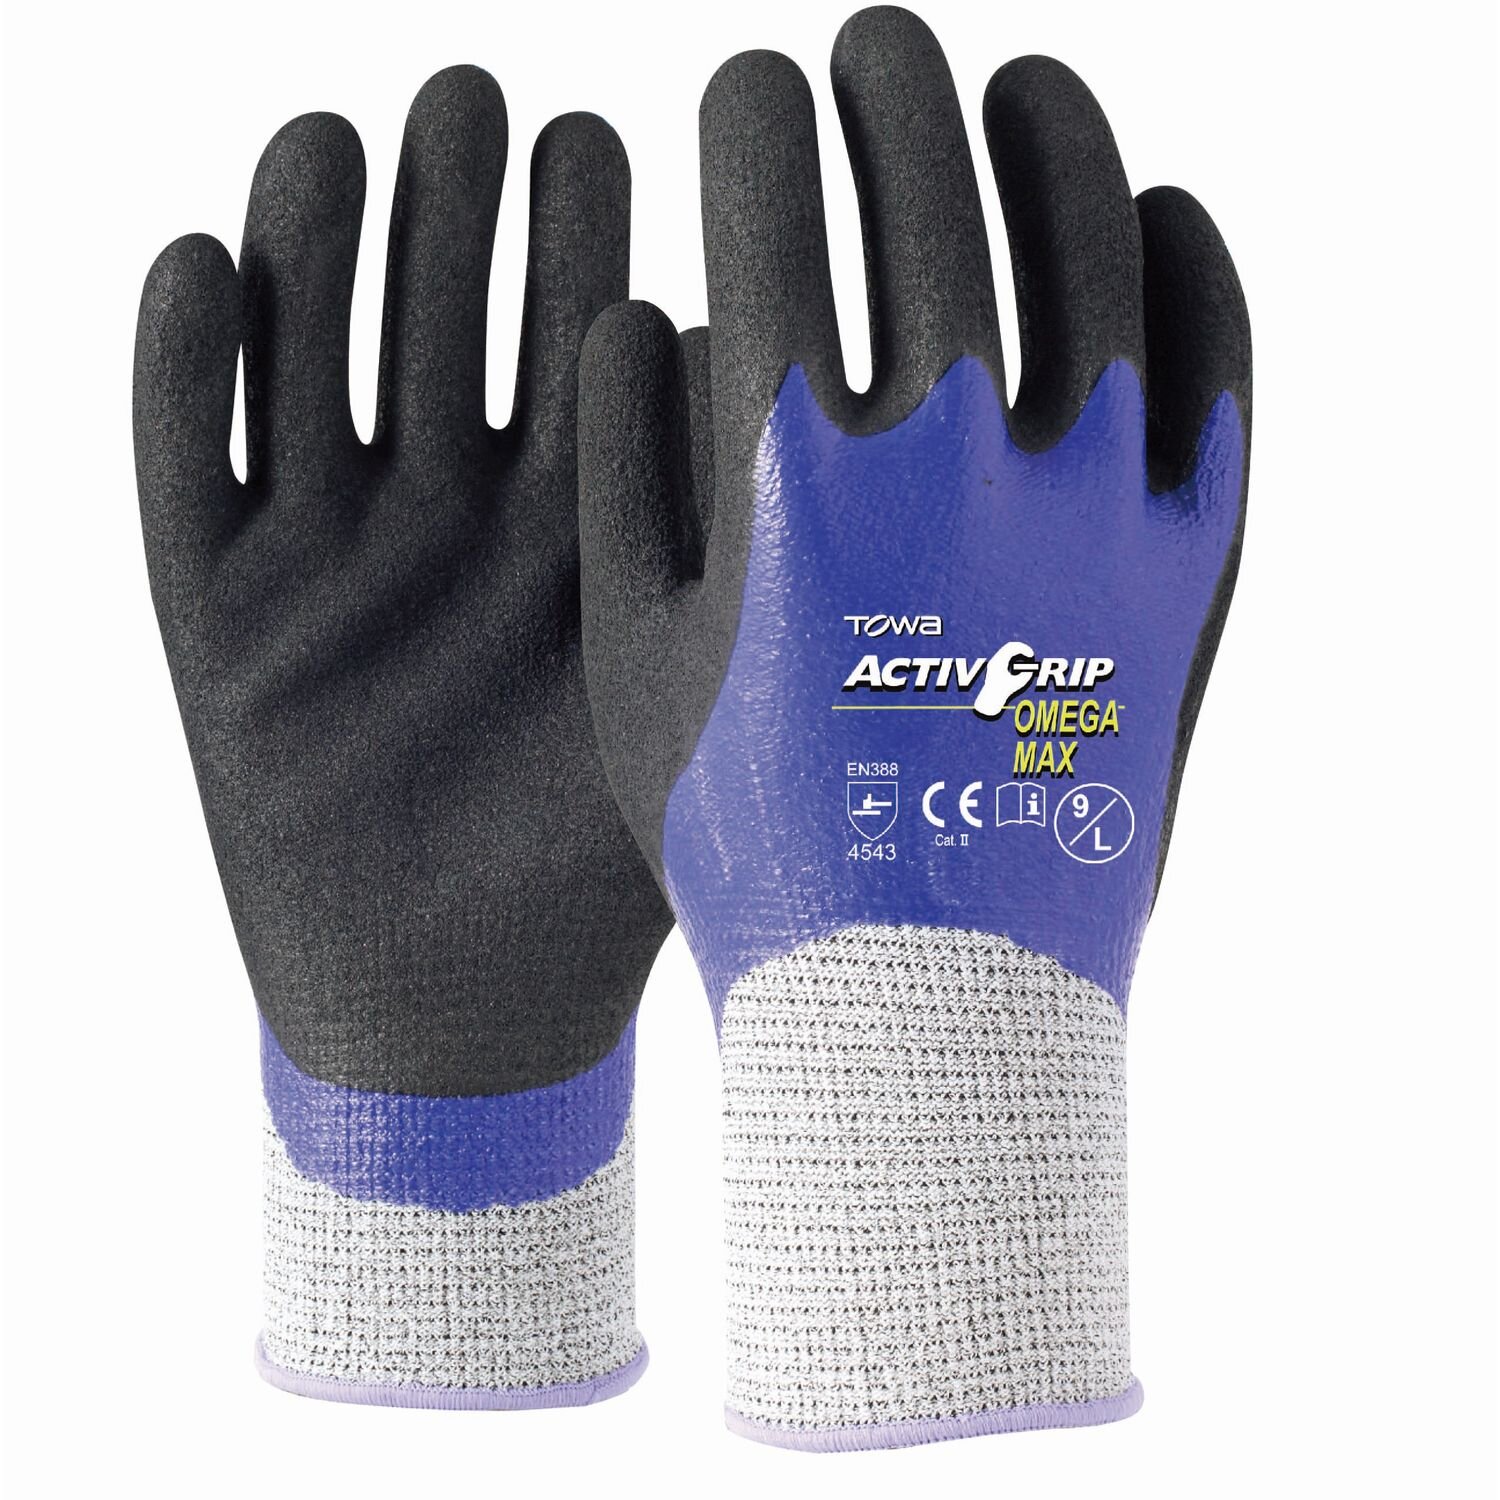 ActivGrip Omega Max Cut 5 Double Nitrile Full Dip Glove (Pkt 12)